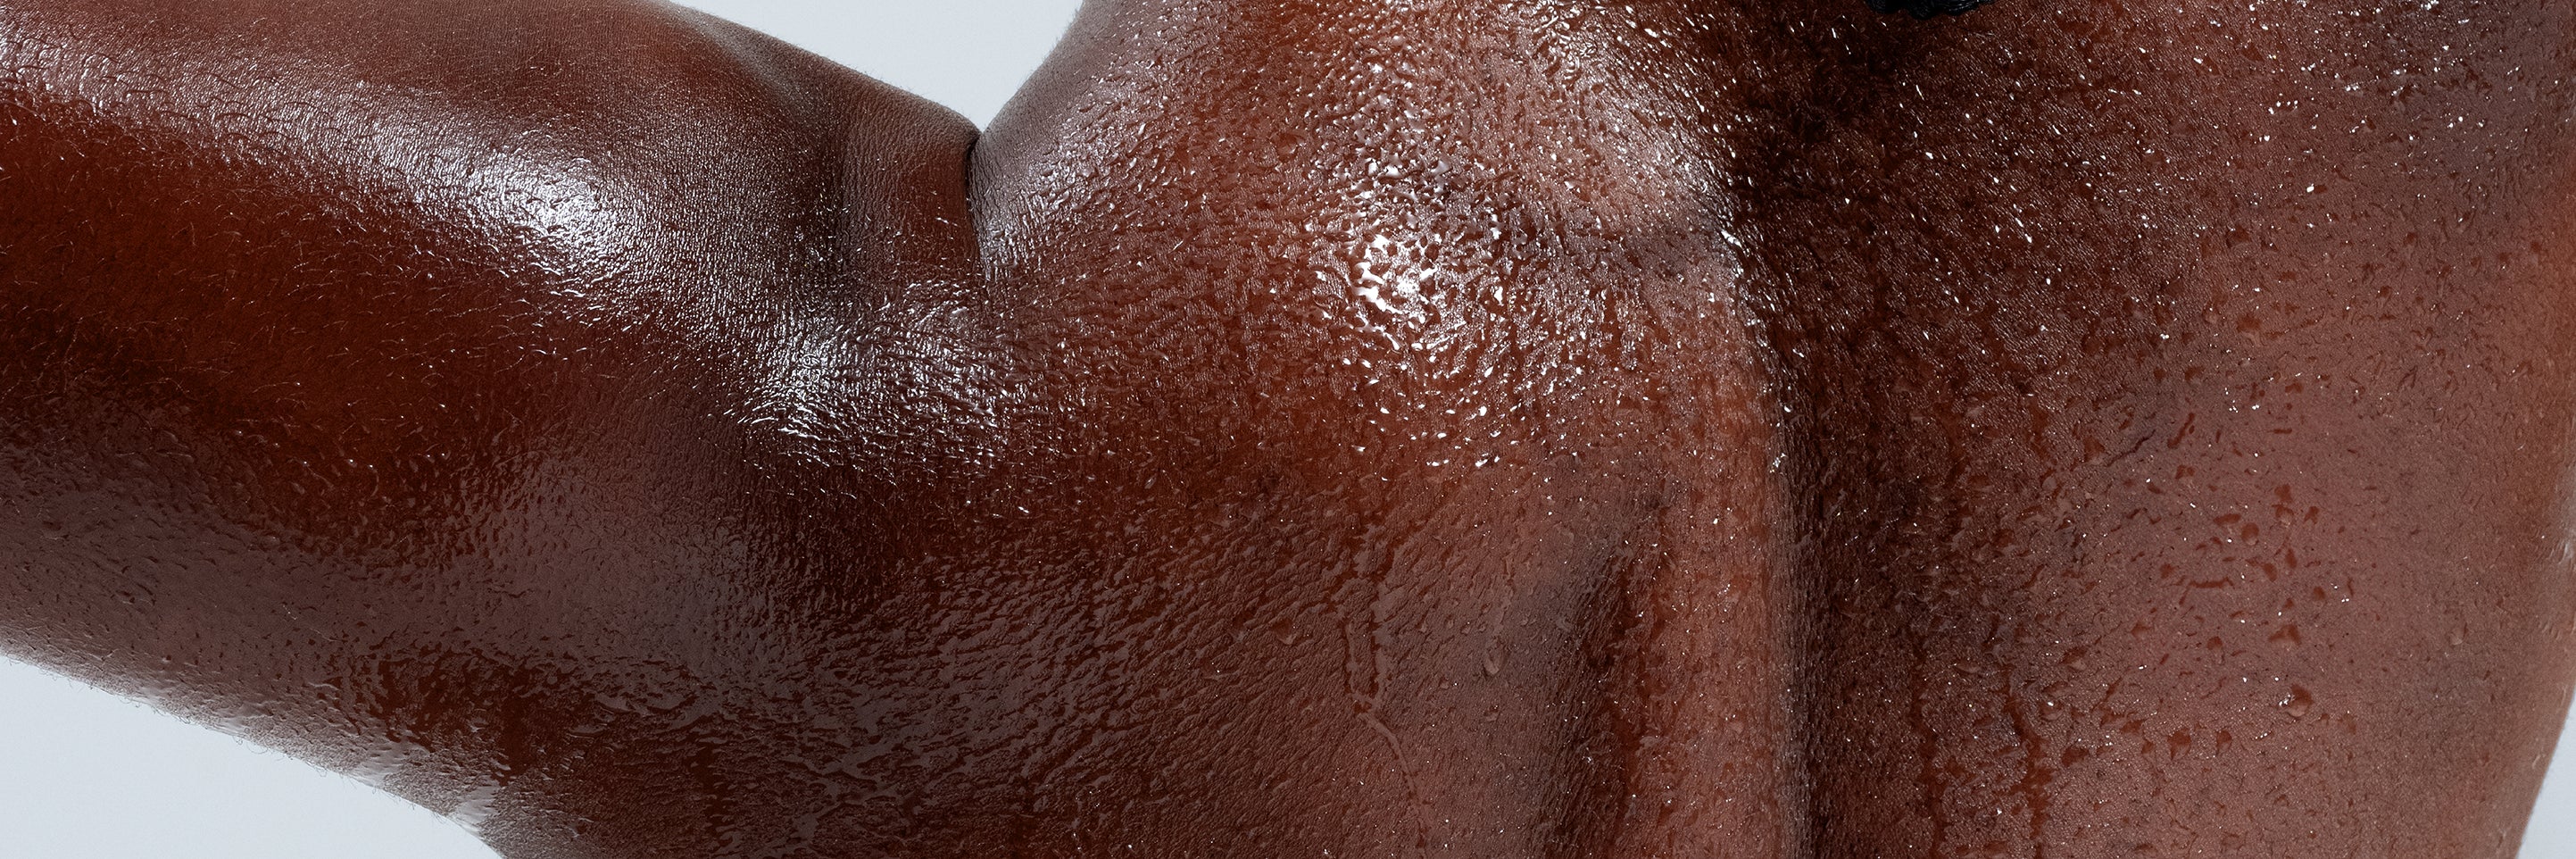 Why Do We Sweat? The Science Behind Sweating